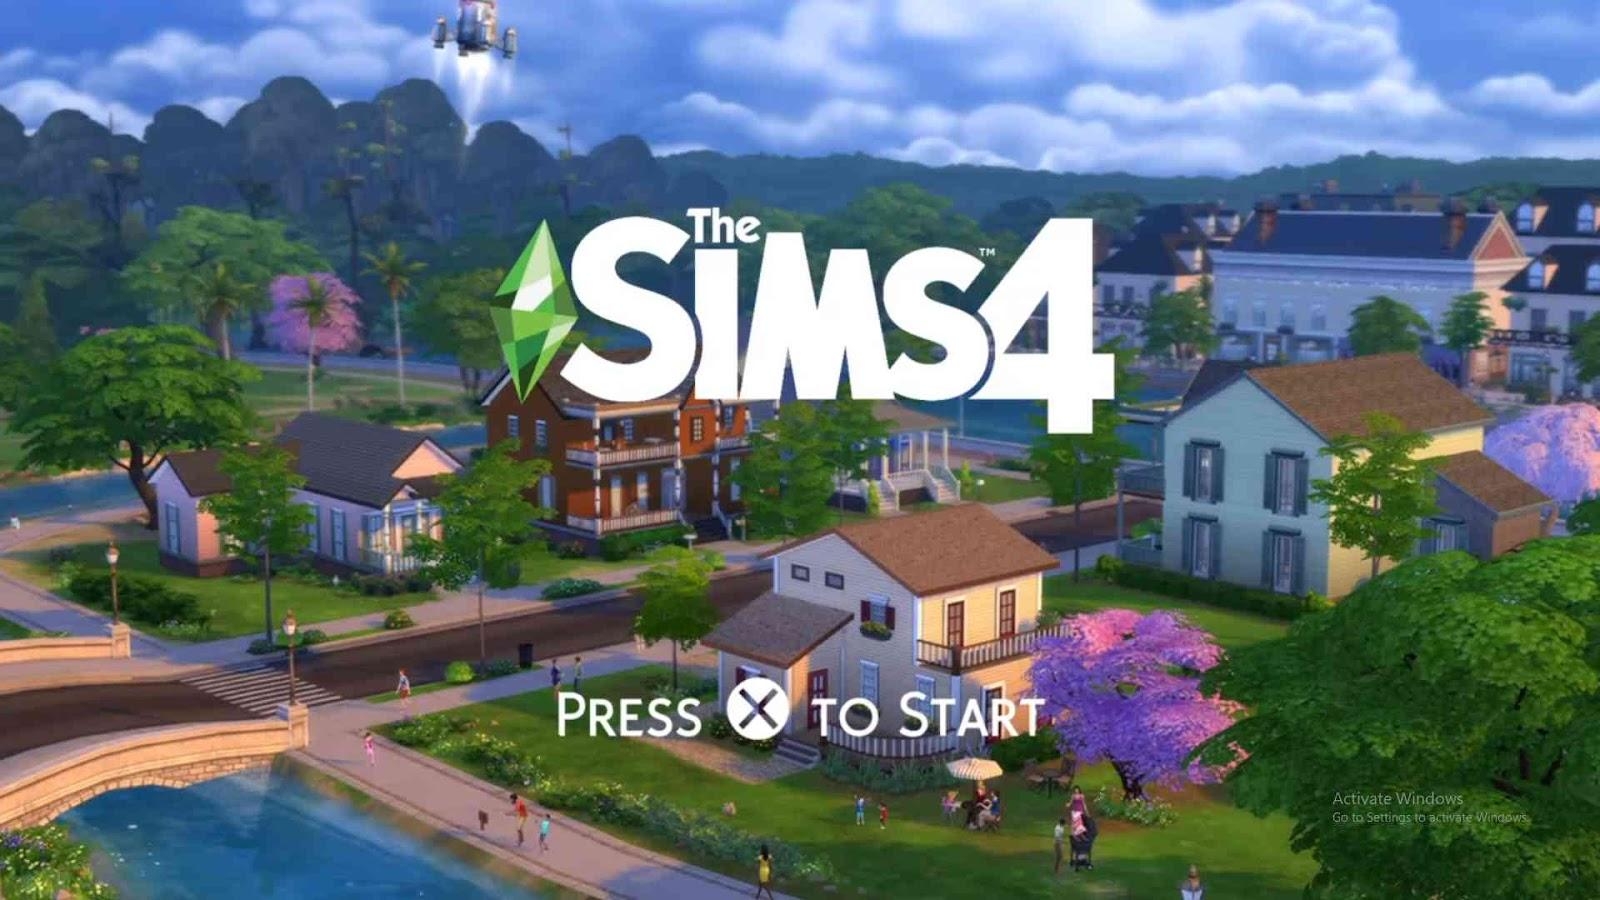 2.The Sims 4